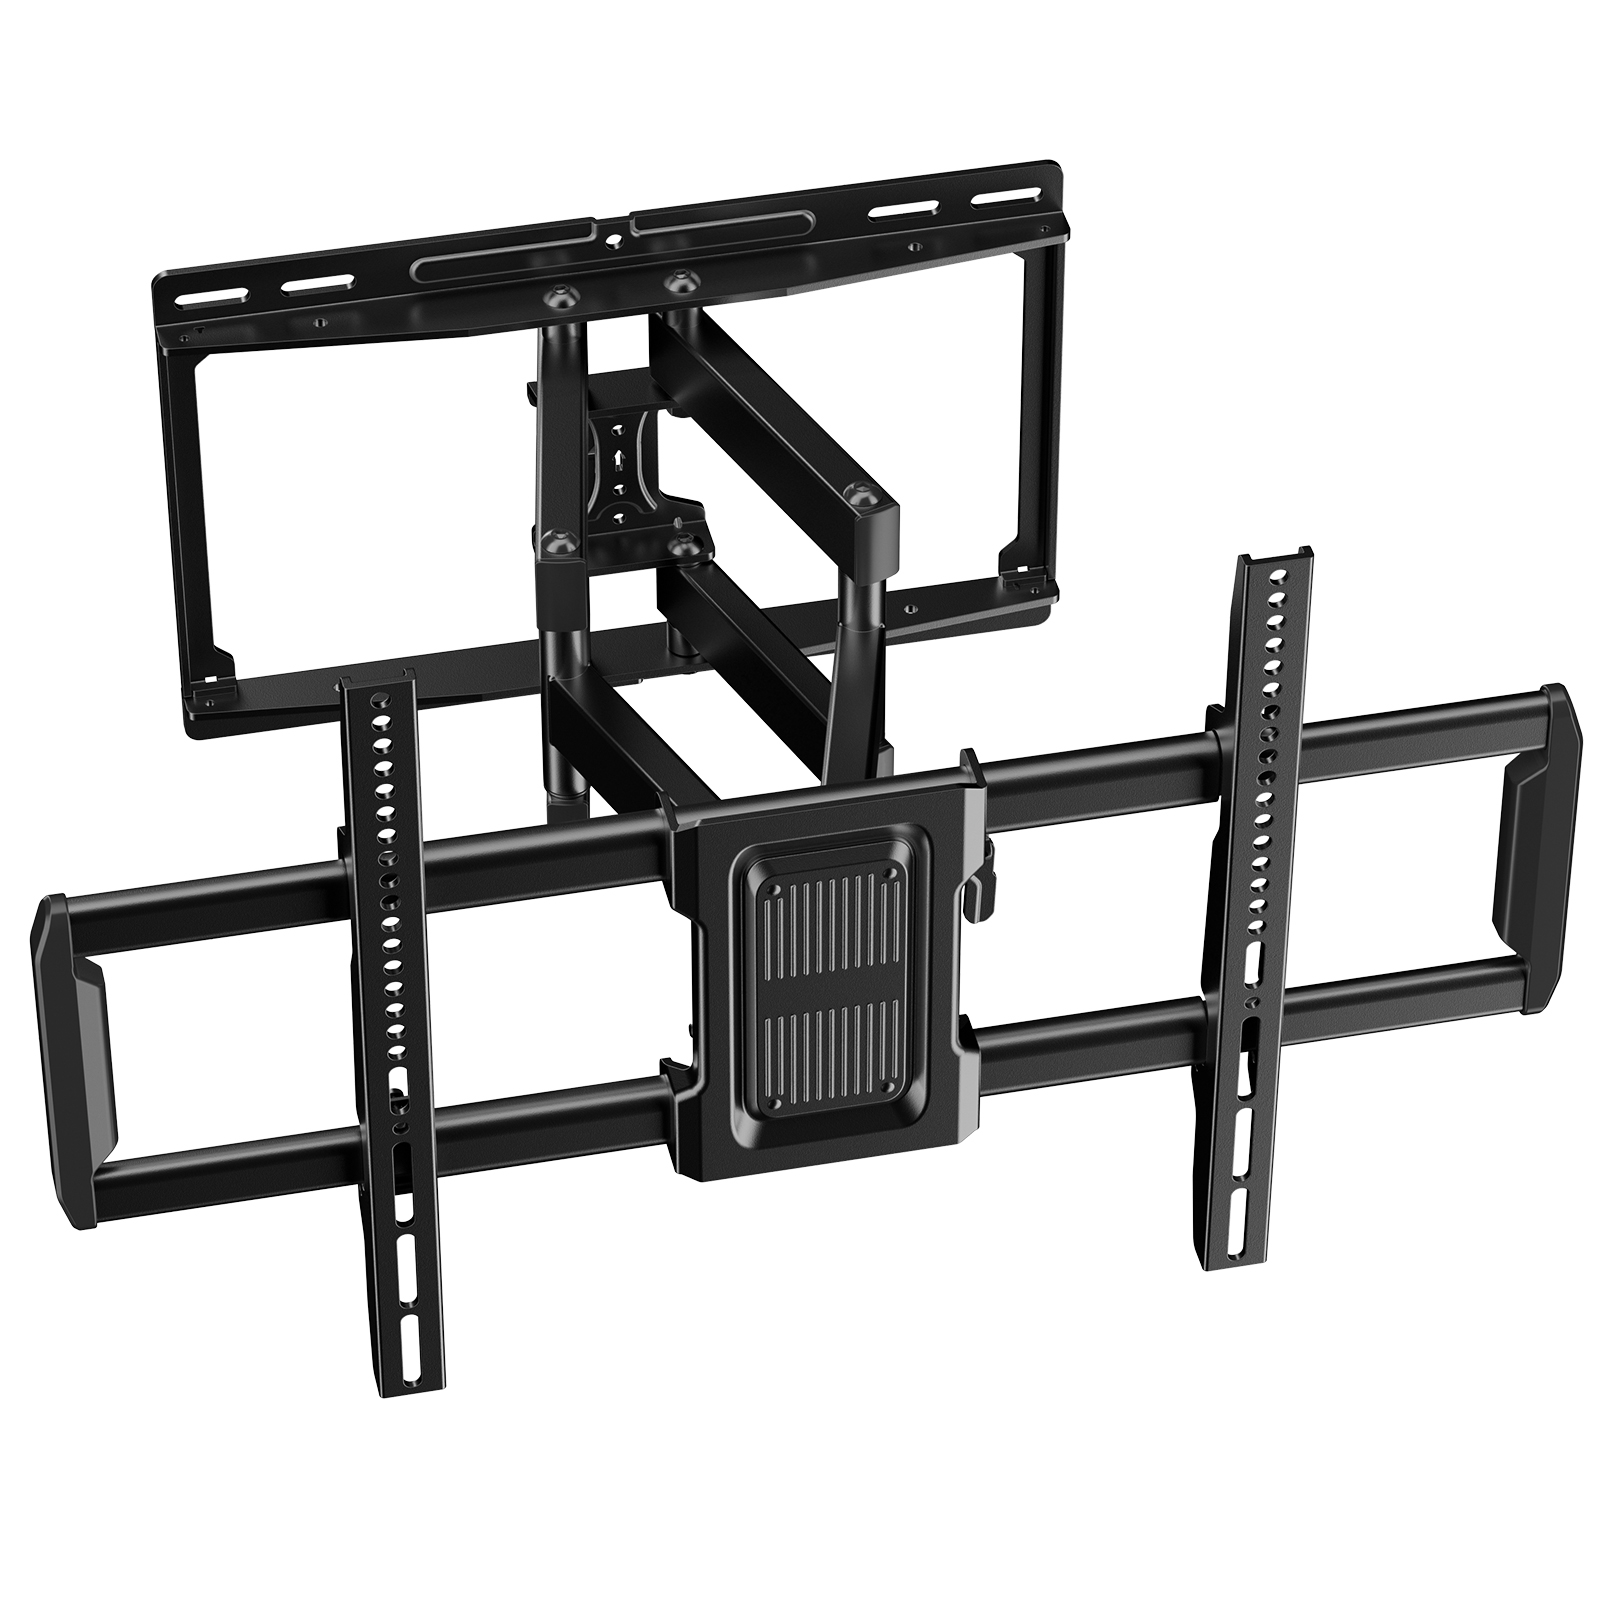 Full Motion TV Wall Mount for 40-82 inch TVs with Swivel, Tilting & Extension Max 600x400, up to 100 lbs - image 1 of 7